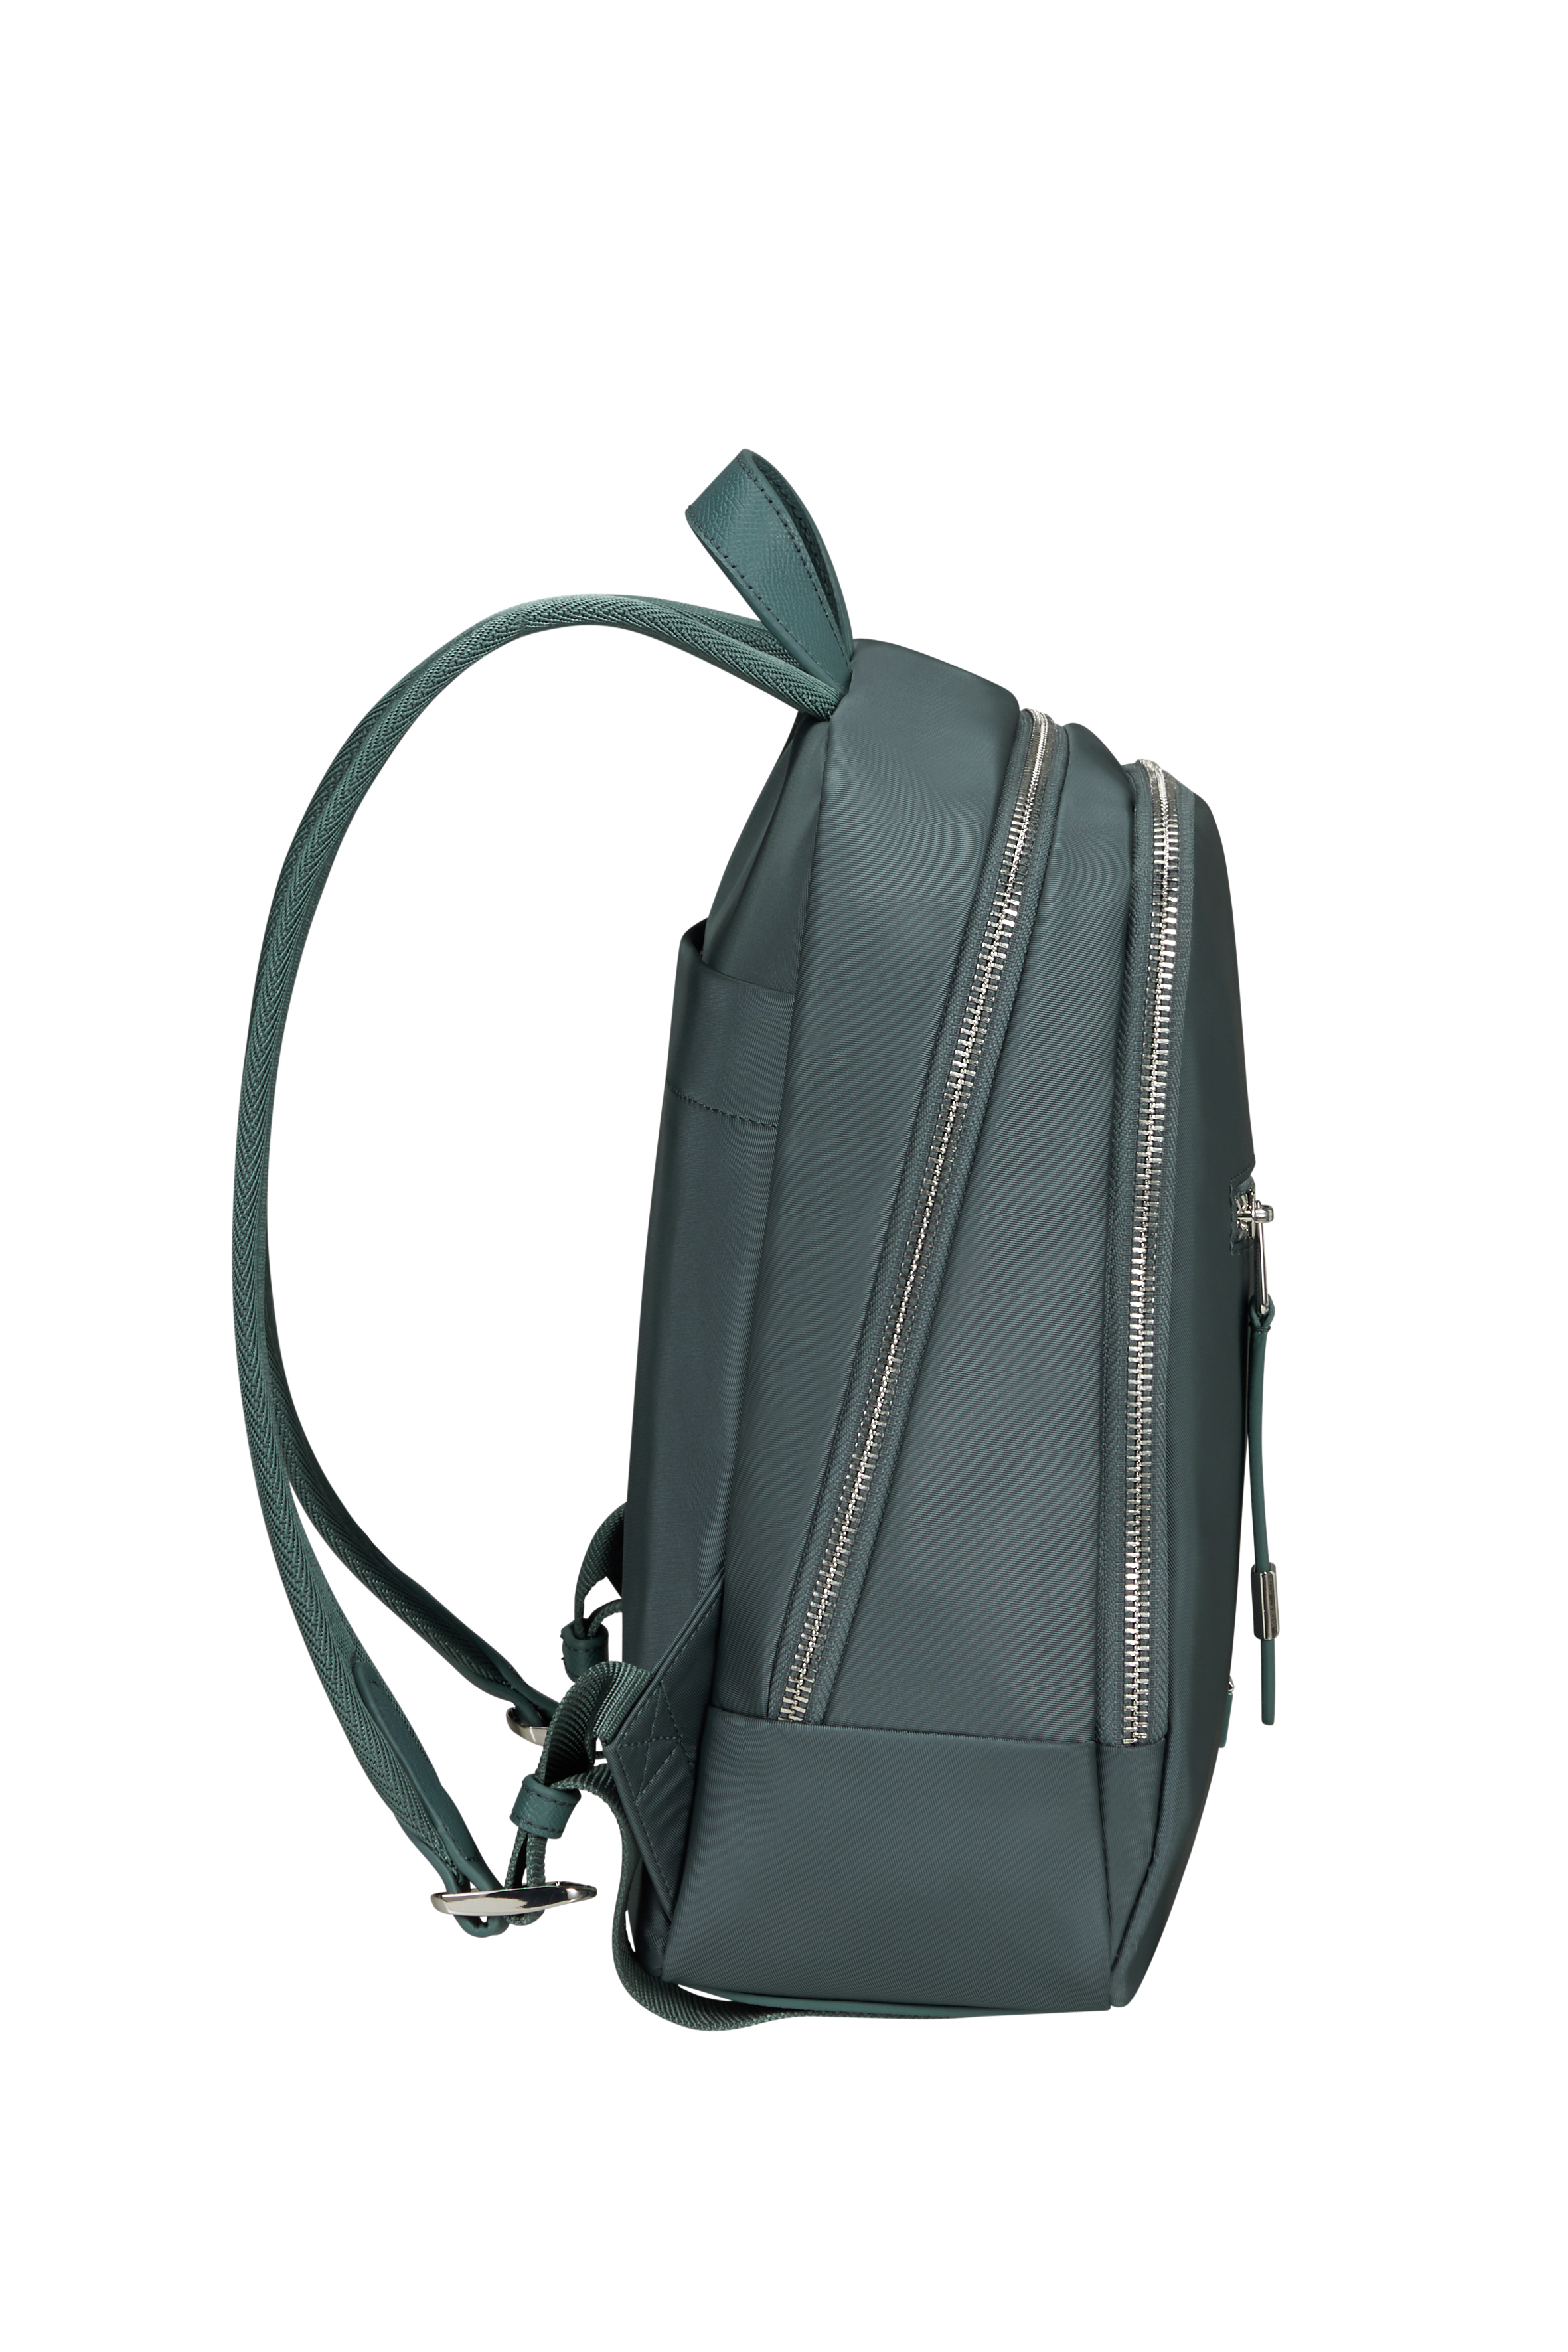 BE-HER BACKPACK S PETROL GREY